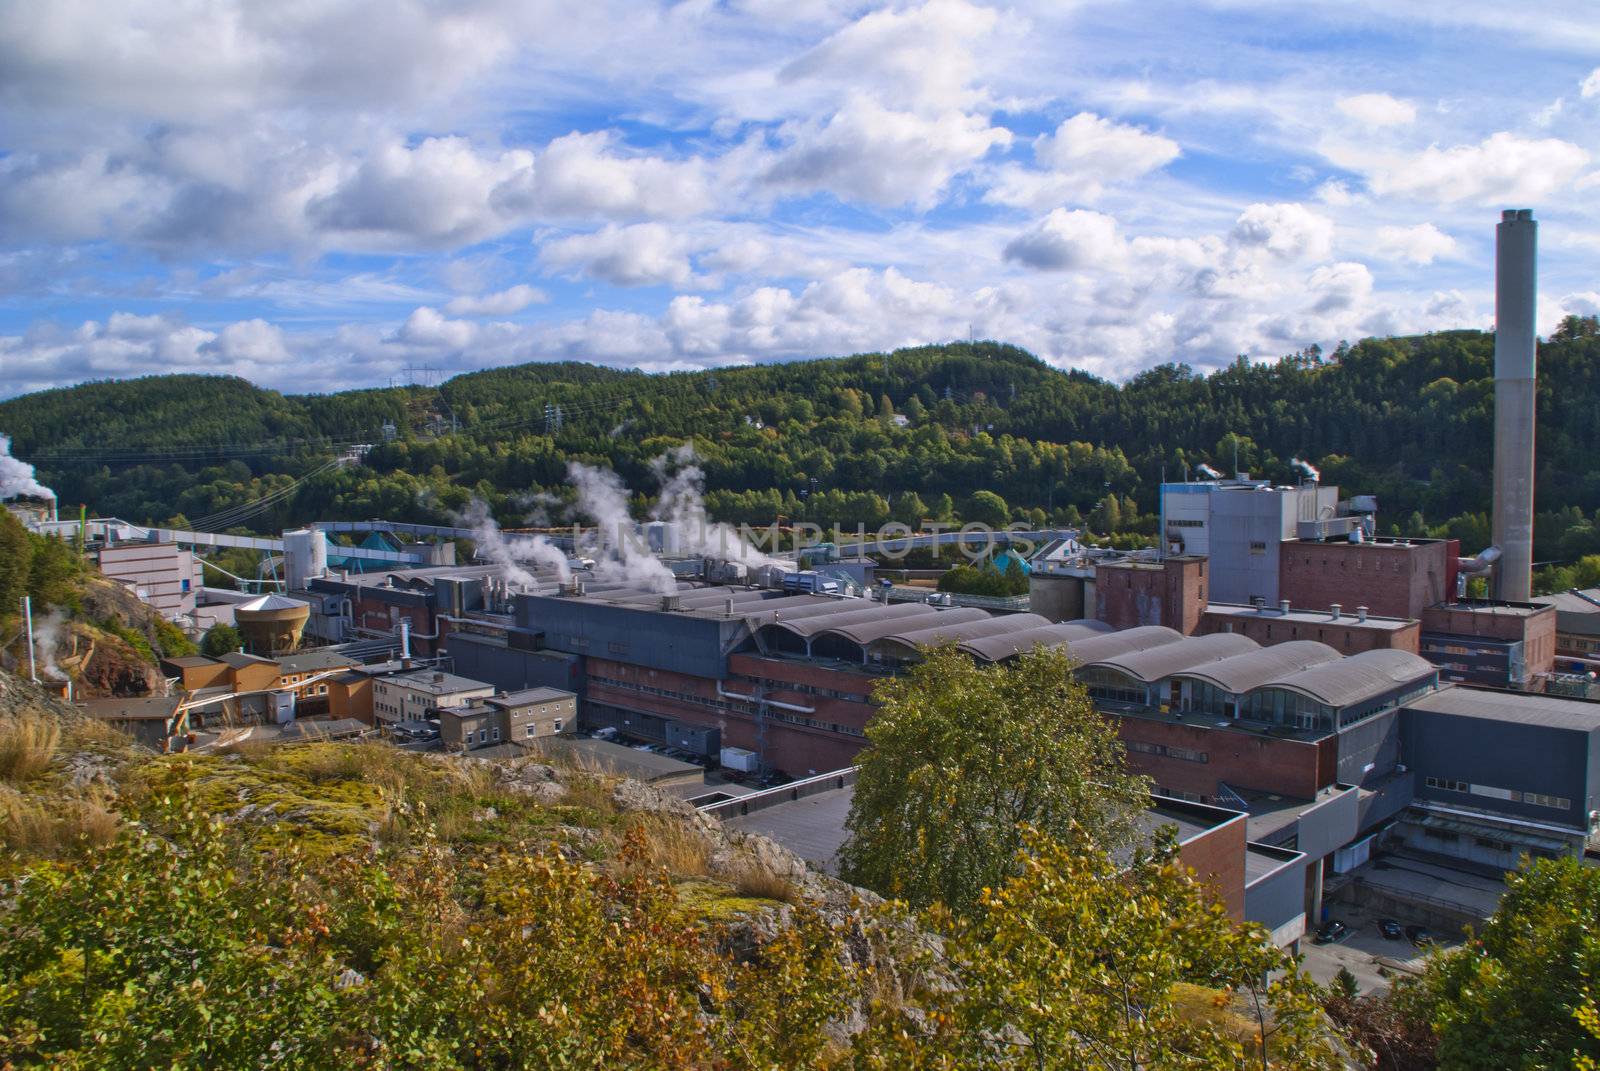 overview paper mill (the old part) by steirus